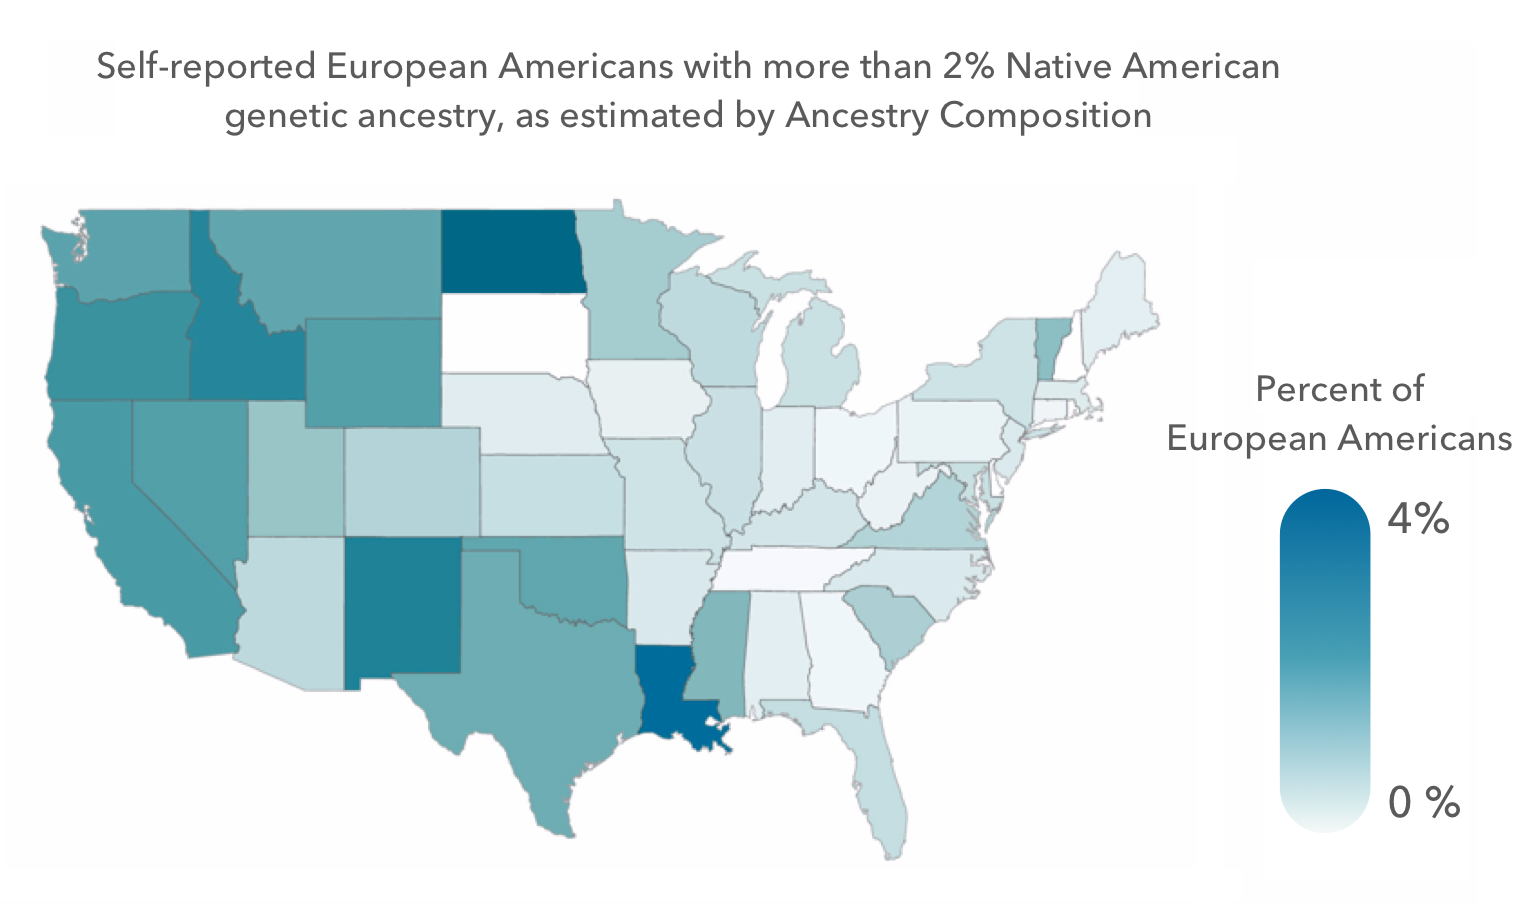 A map of the US showing concentrations of European Americans with Native American ancestry.